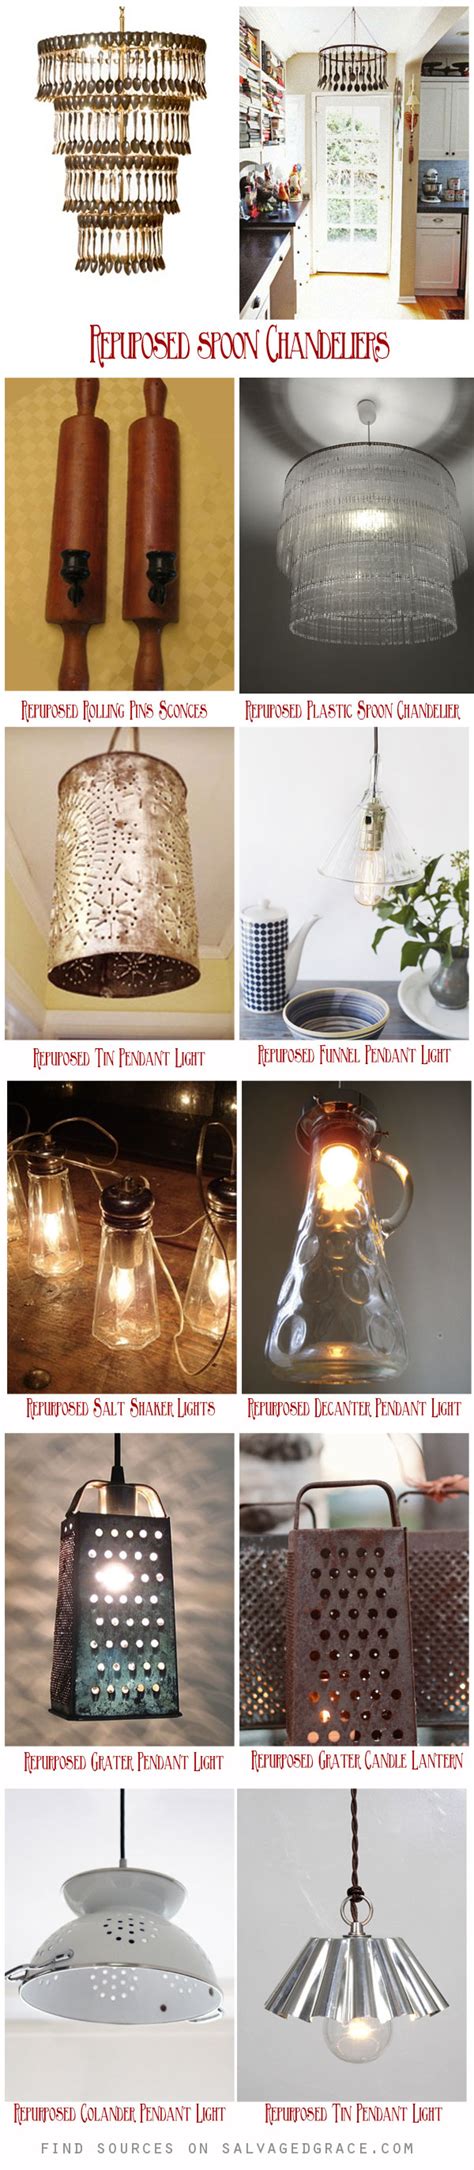 Repurpose Upcycle Recycle Kitchen Items Such As Salt And Pepper